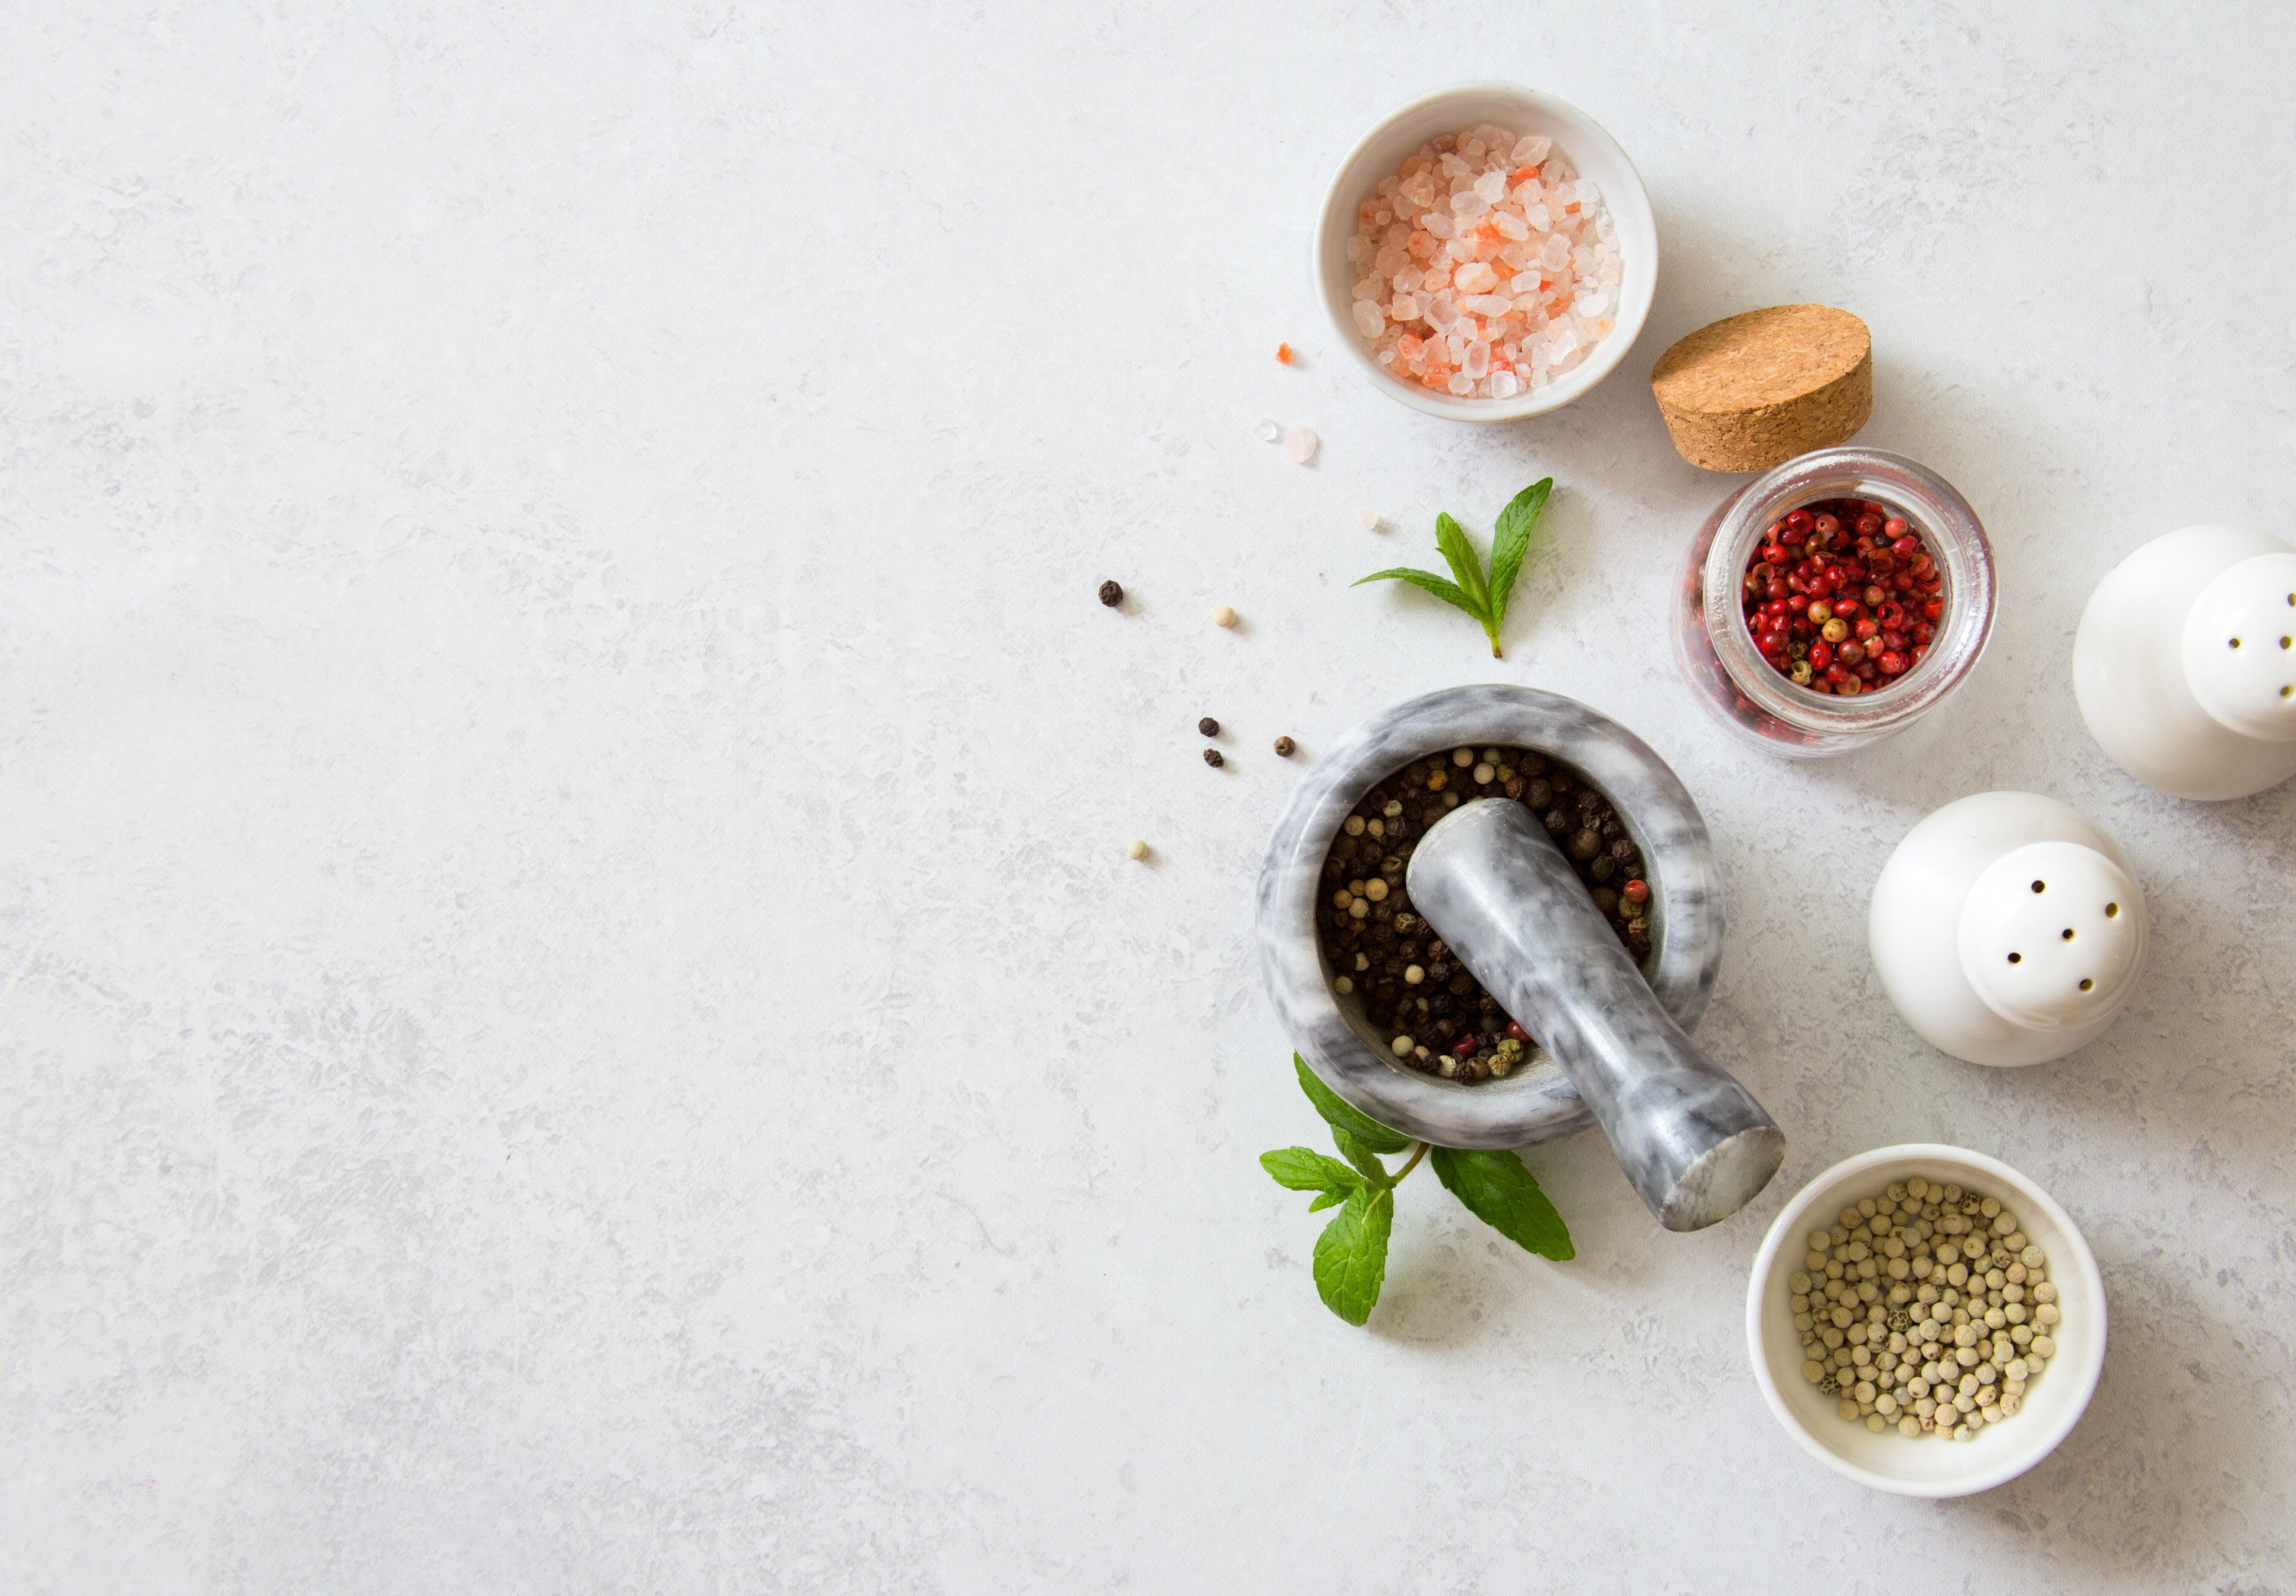 Salt, pepper, and other spices